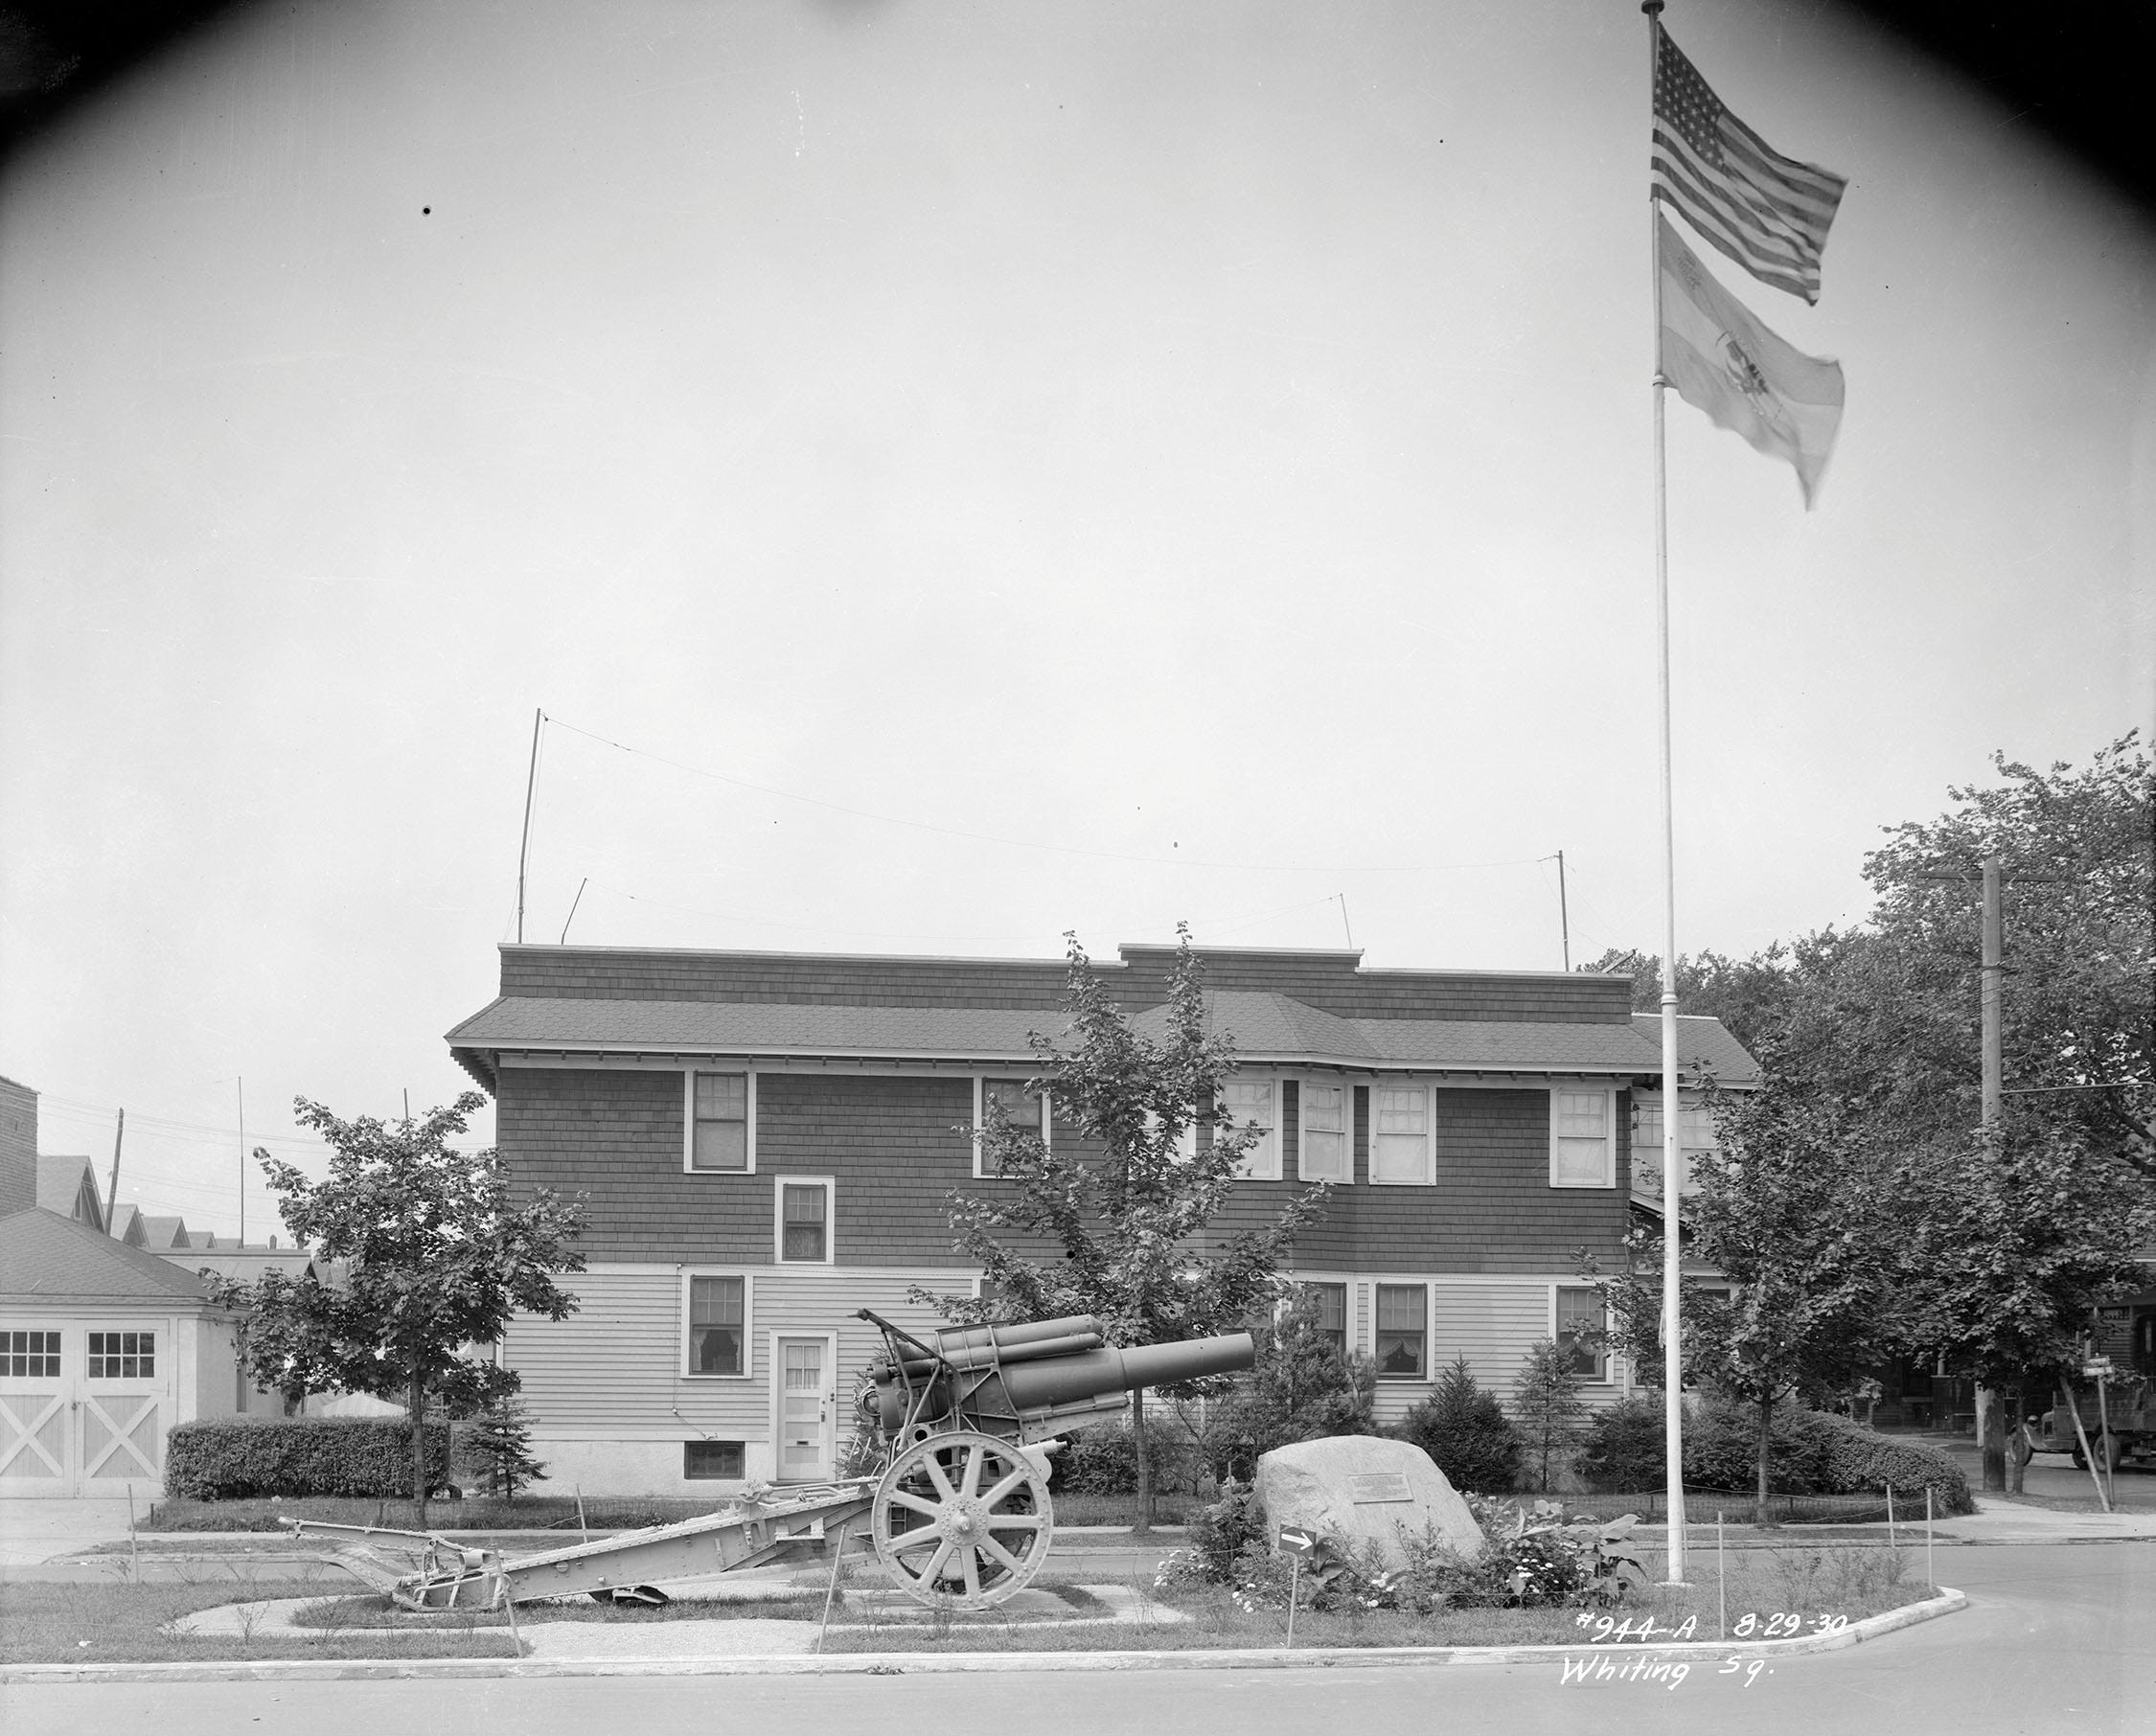 Image is a photograph of Whiting Square in 1930 with the Krupp howitzer, the rock with brass plaque on it and flagpole with flag.